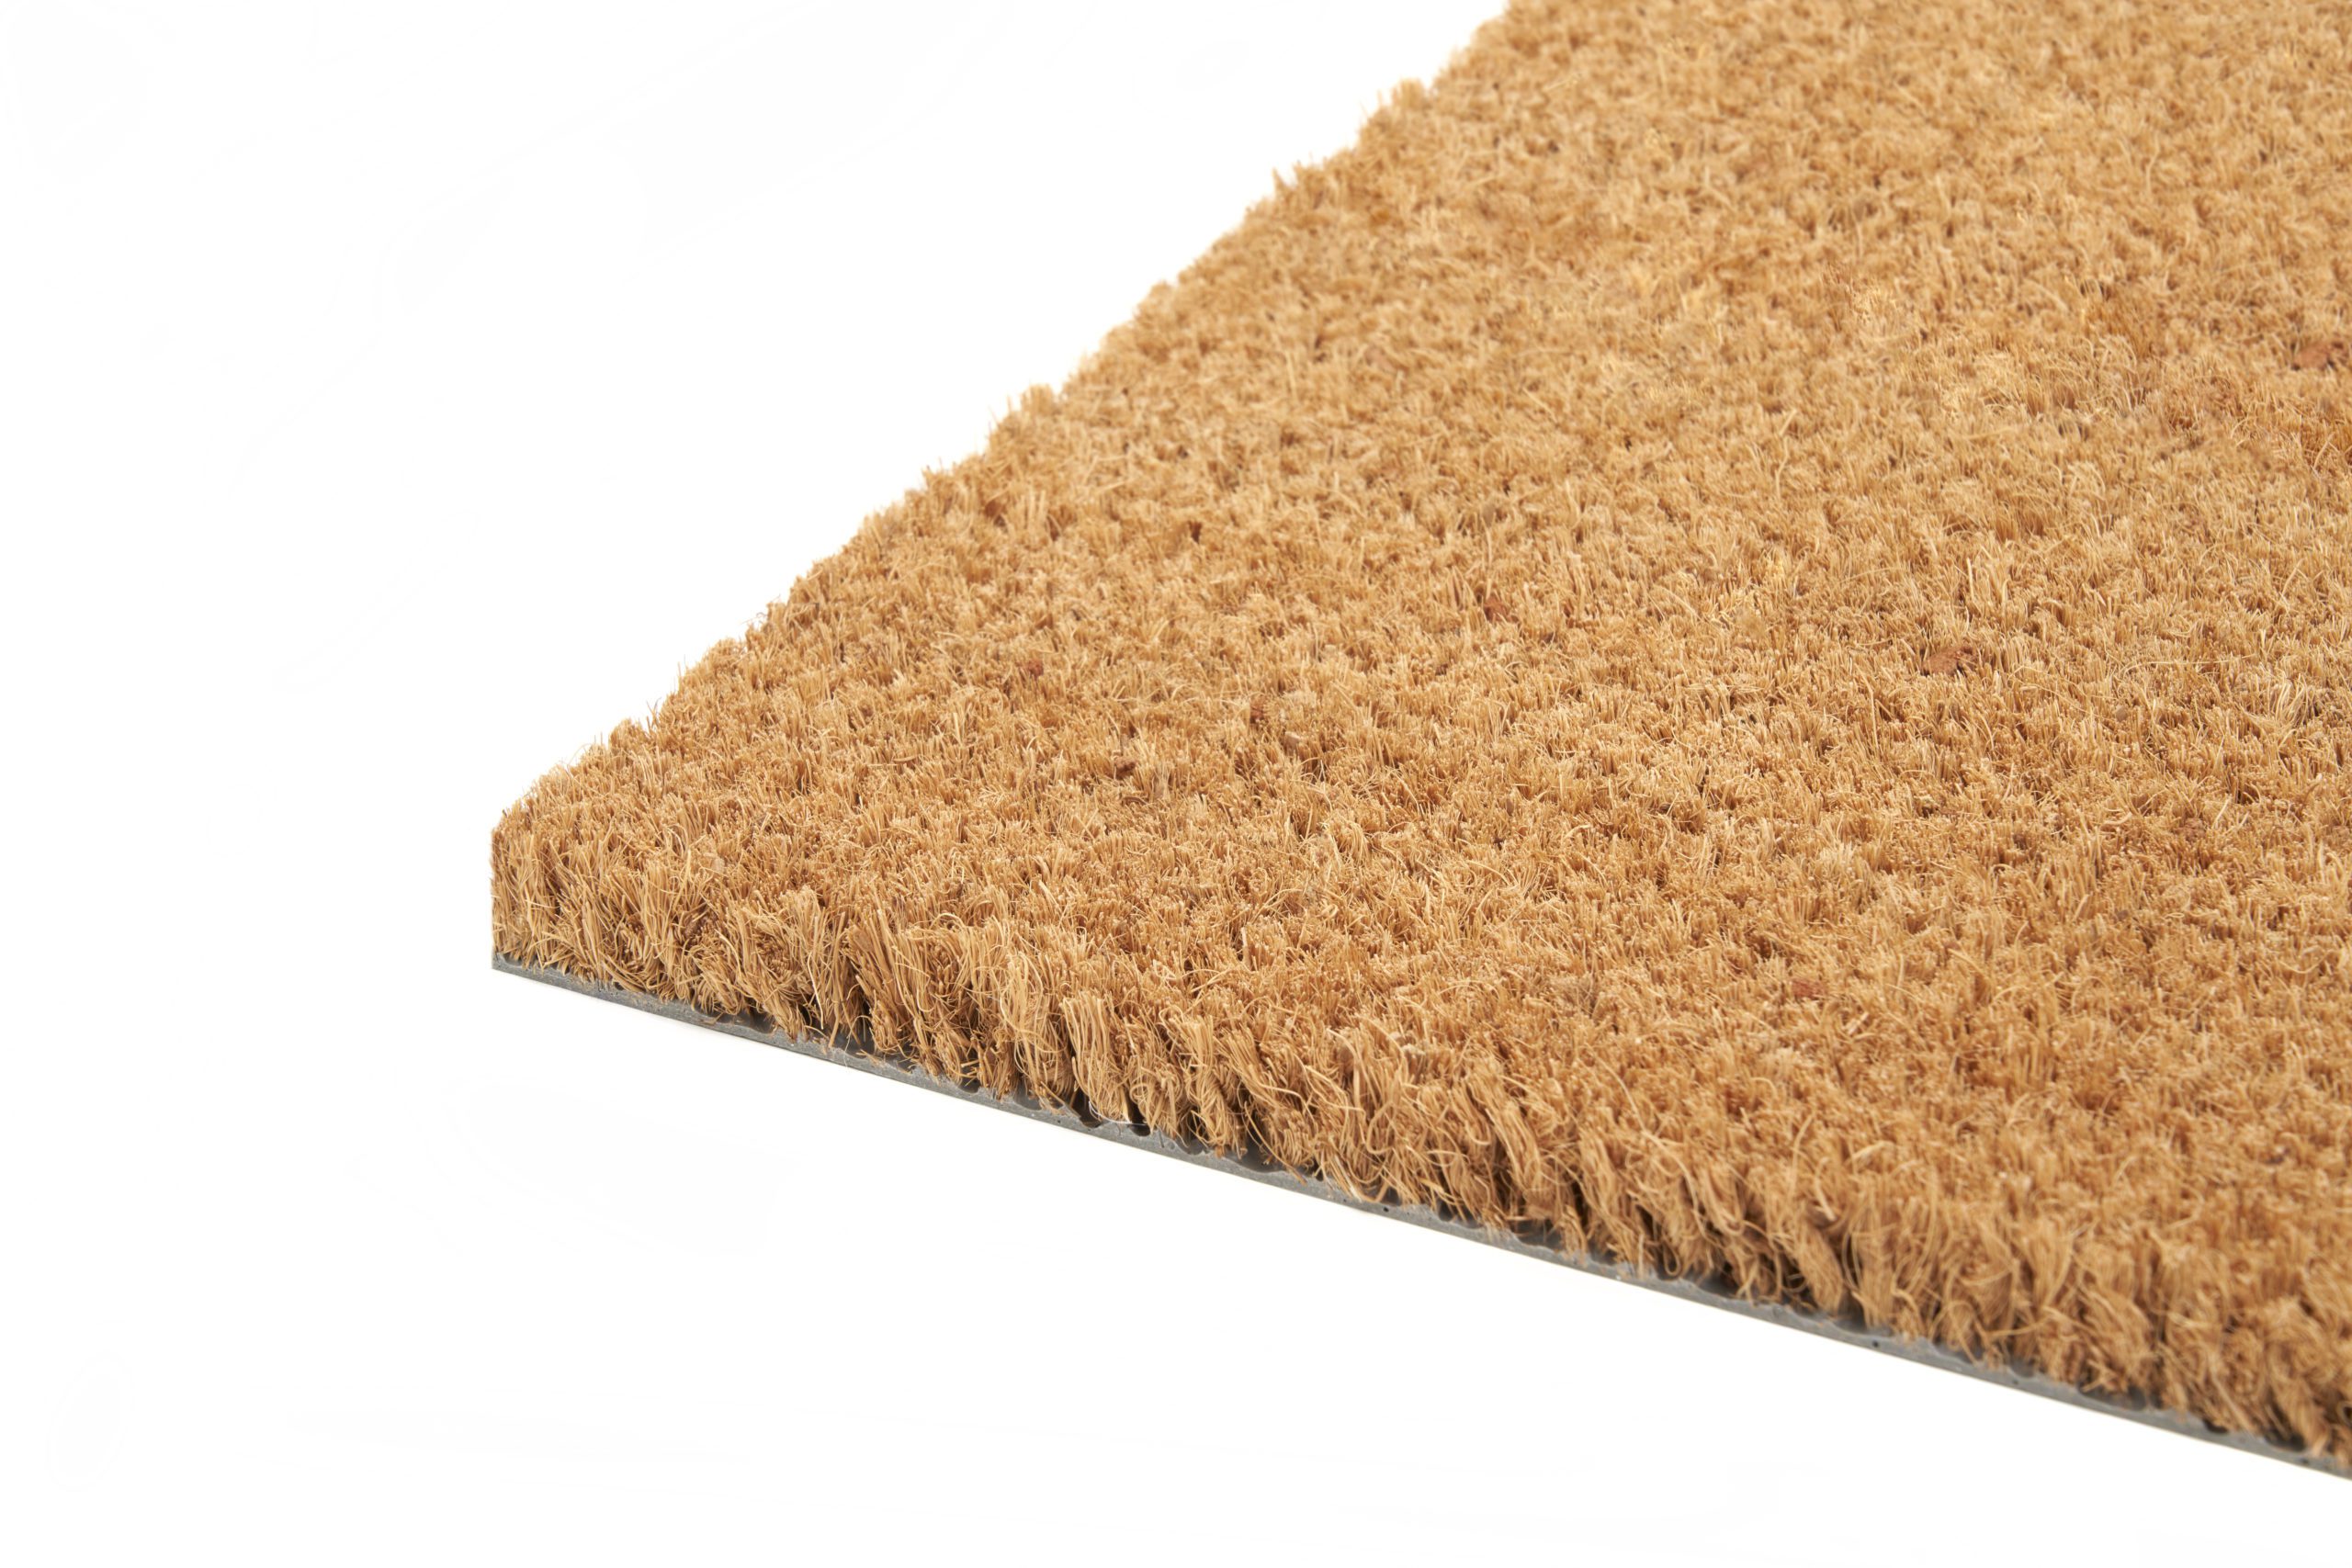 https://classic-arch.com/wp-content/uploads/2022/04/Coir_Natural-scaled.jpg